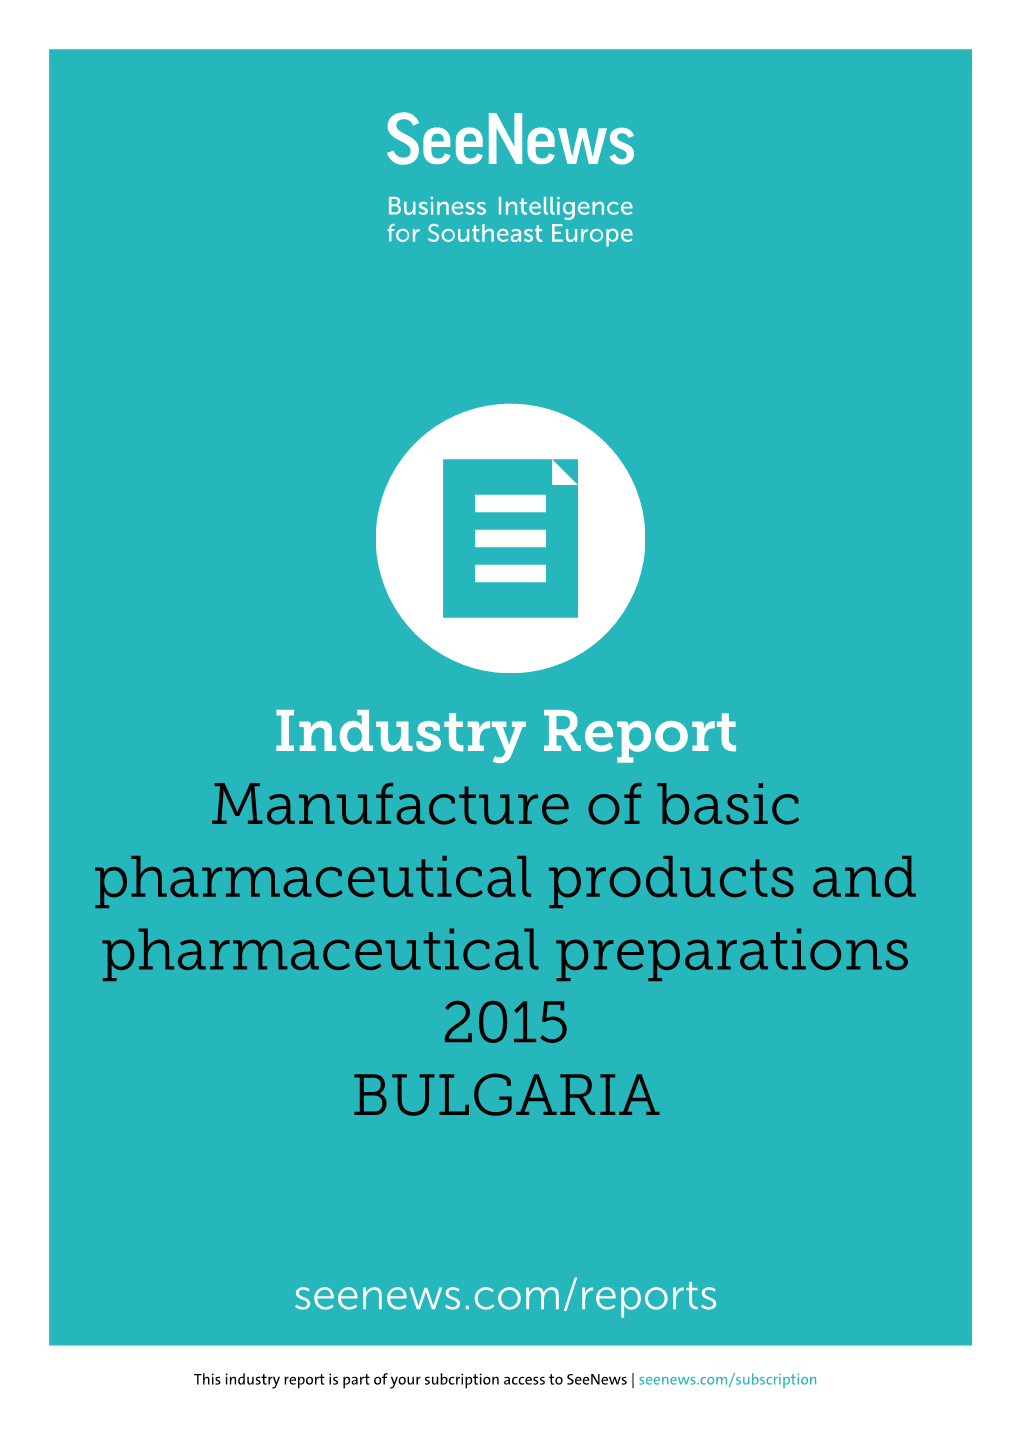 Industry Report Manufacture of Basic Pharmaceutical Products and Pharmaceutical Preparations 2015 BULGARIA